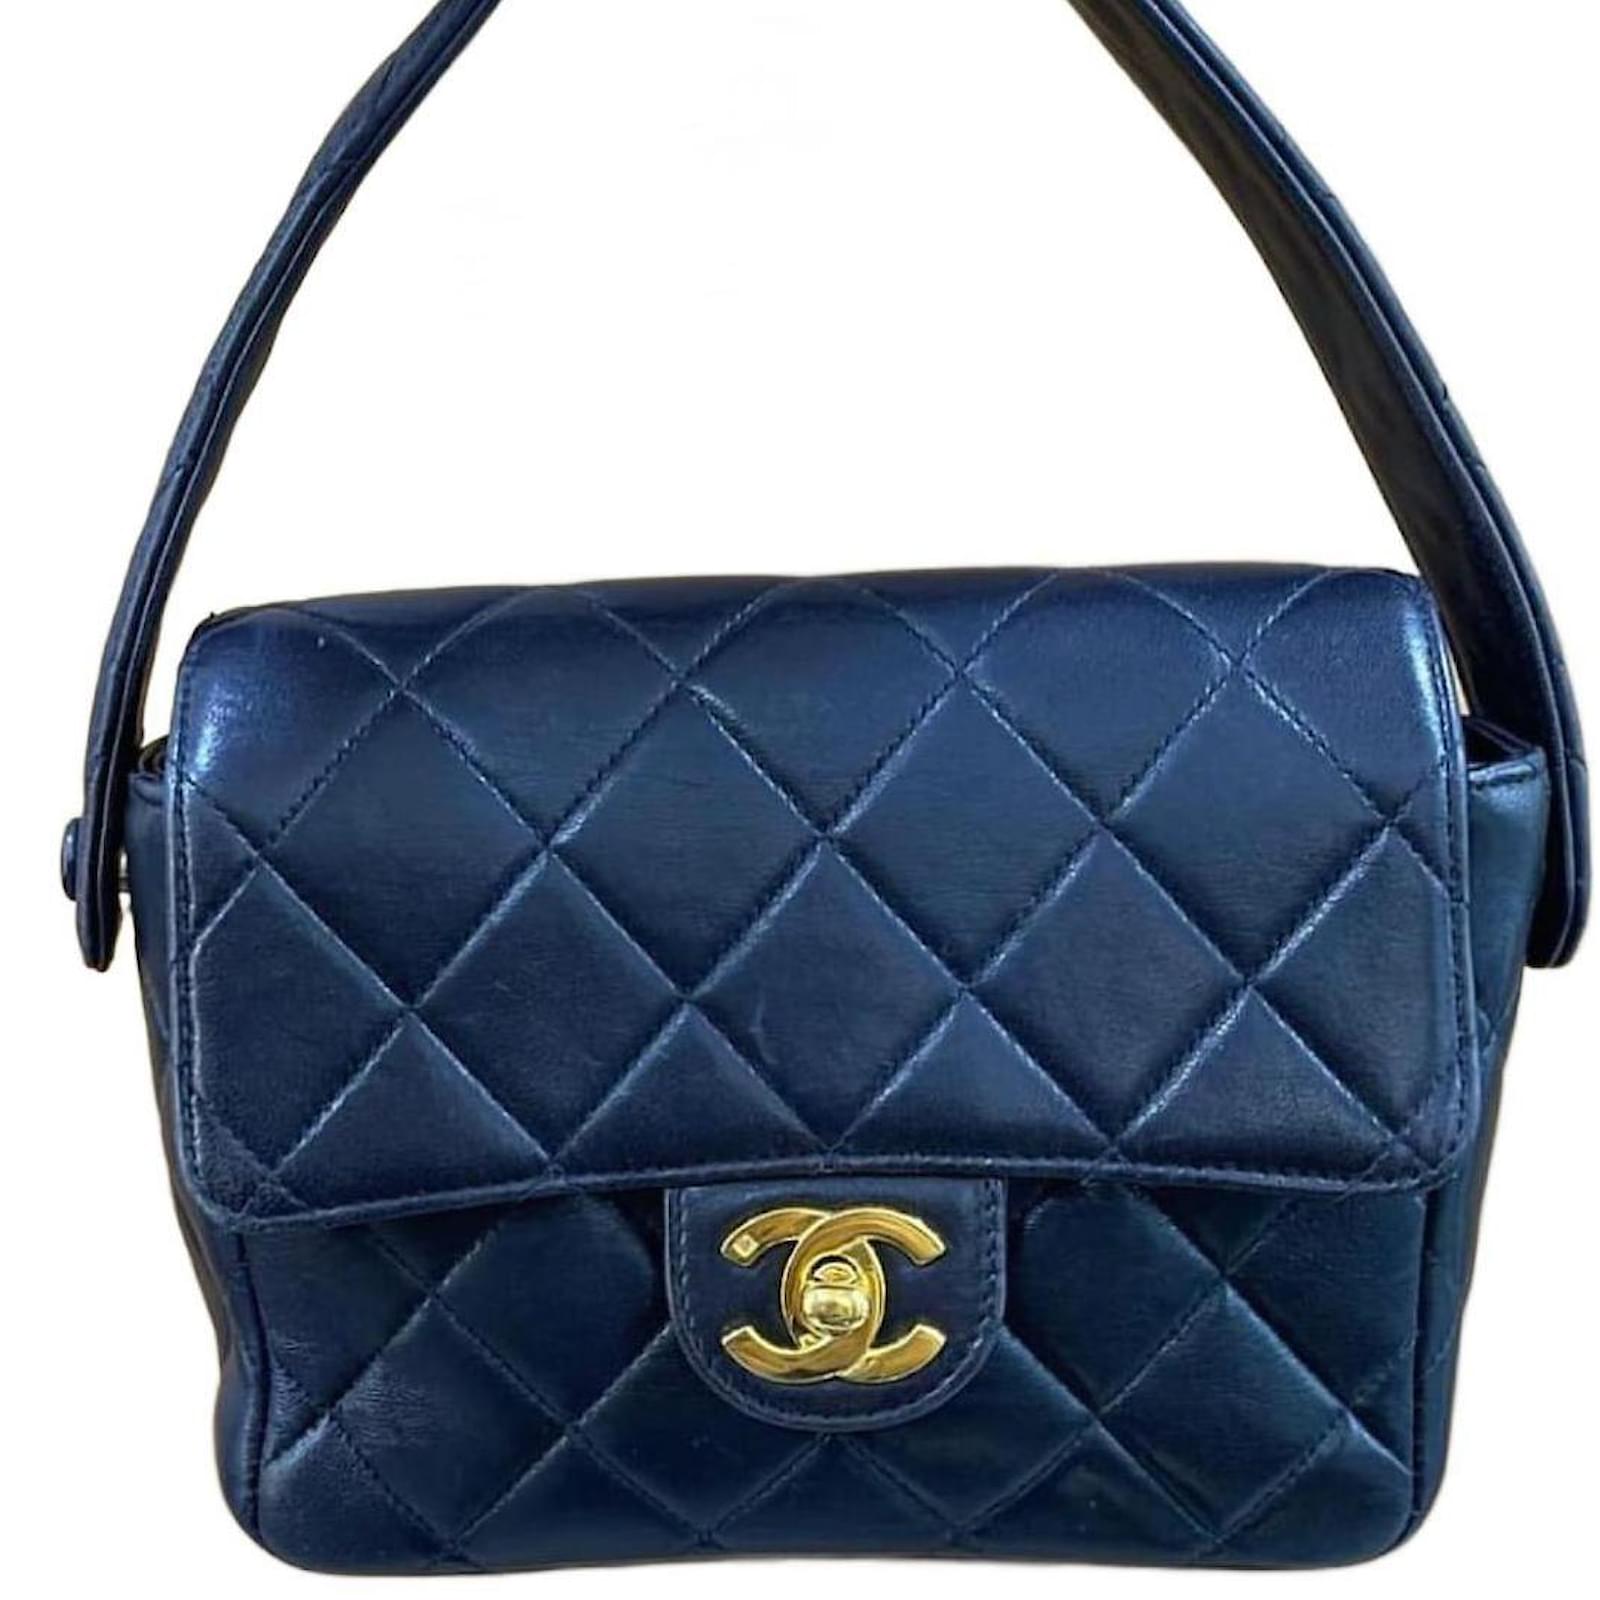 NEW VINTAGE CHANEL HANDBAG SMALL CLASSIC TIMELESS QUILTED LEATHER